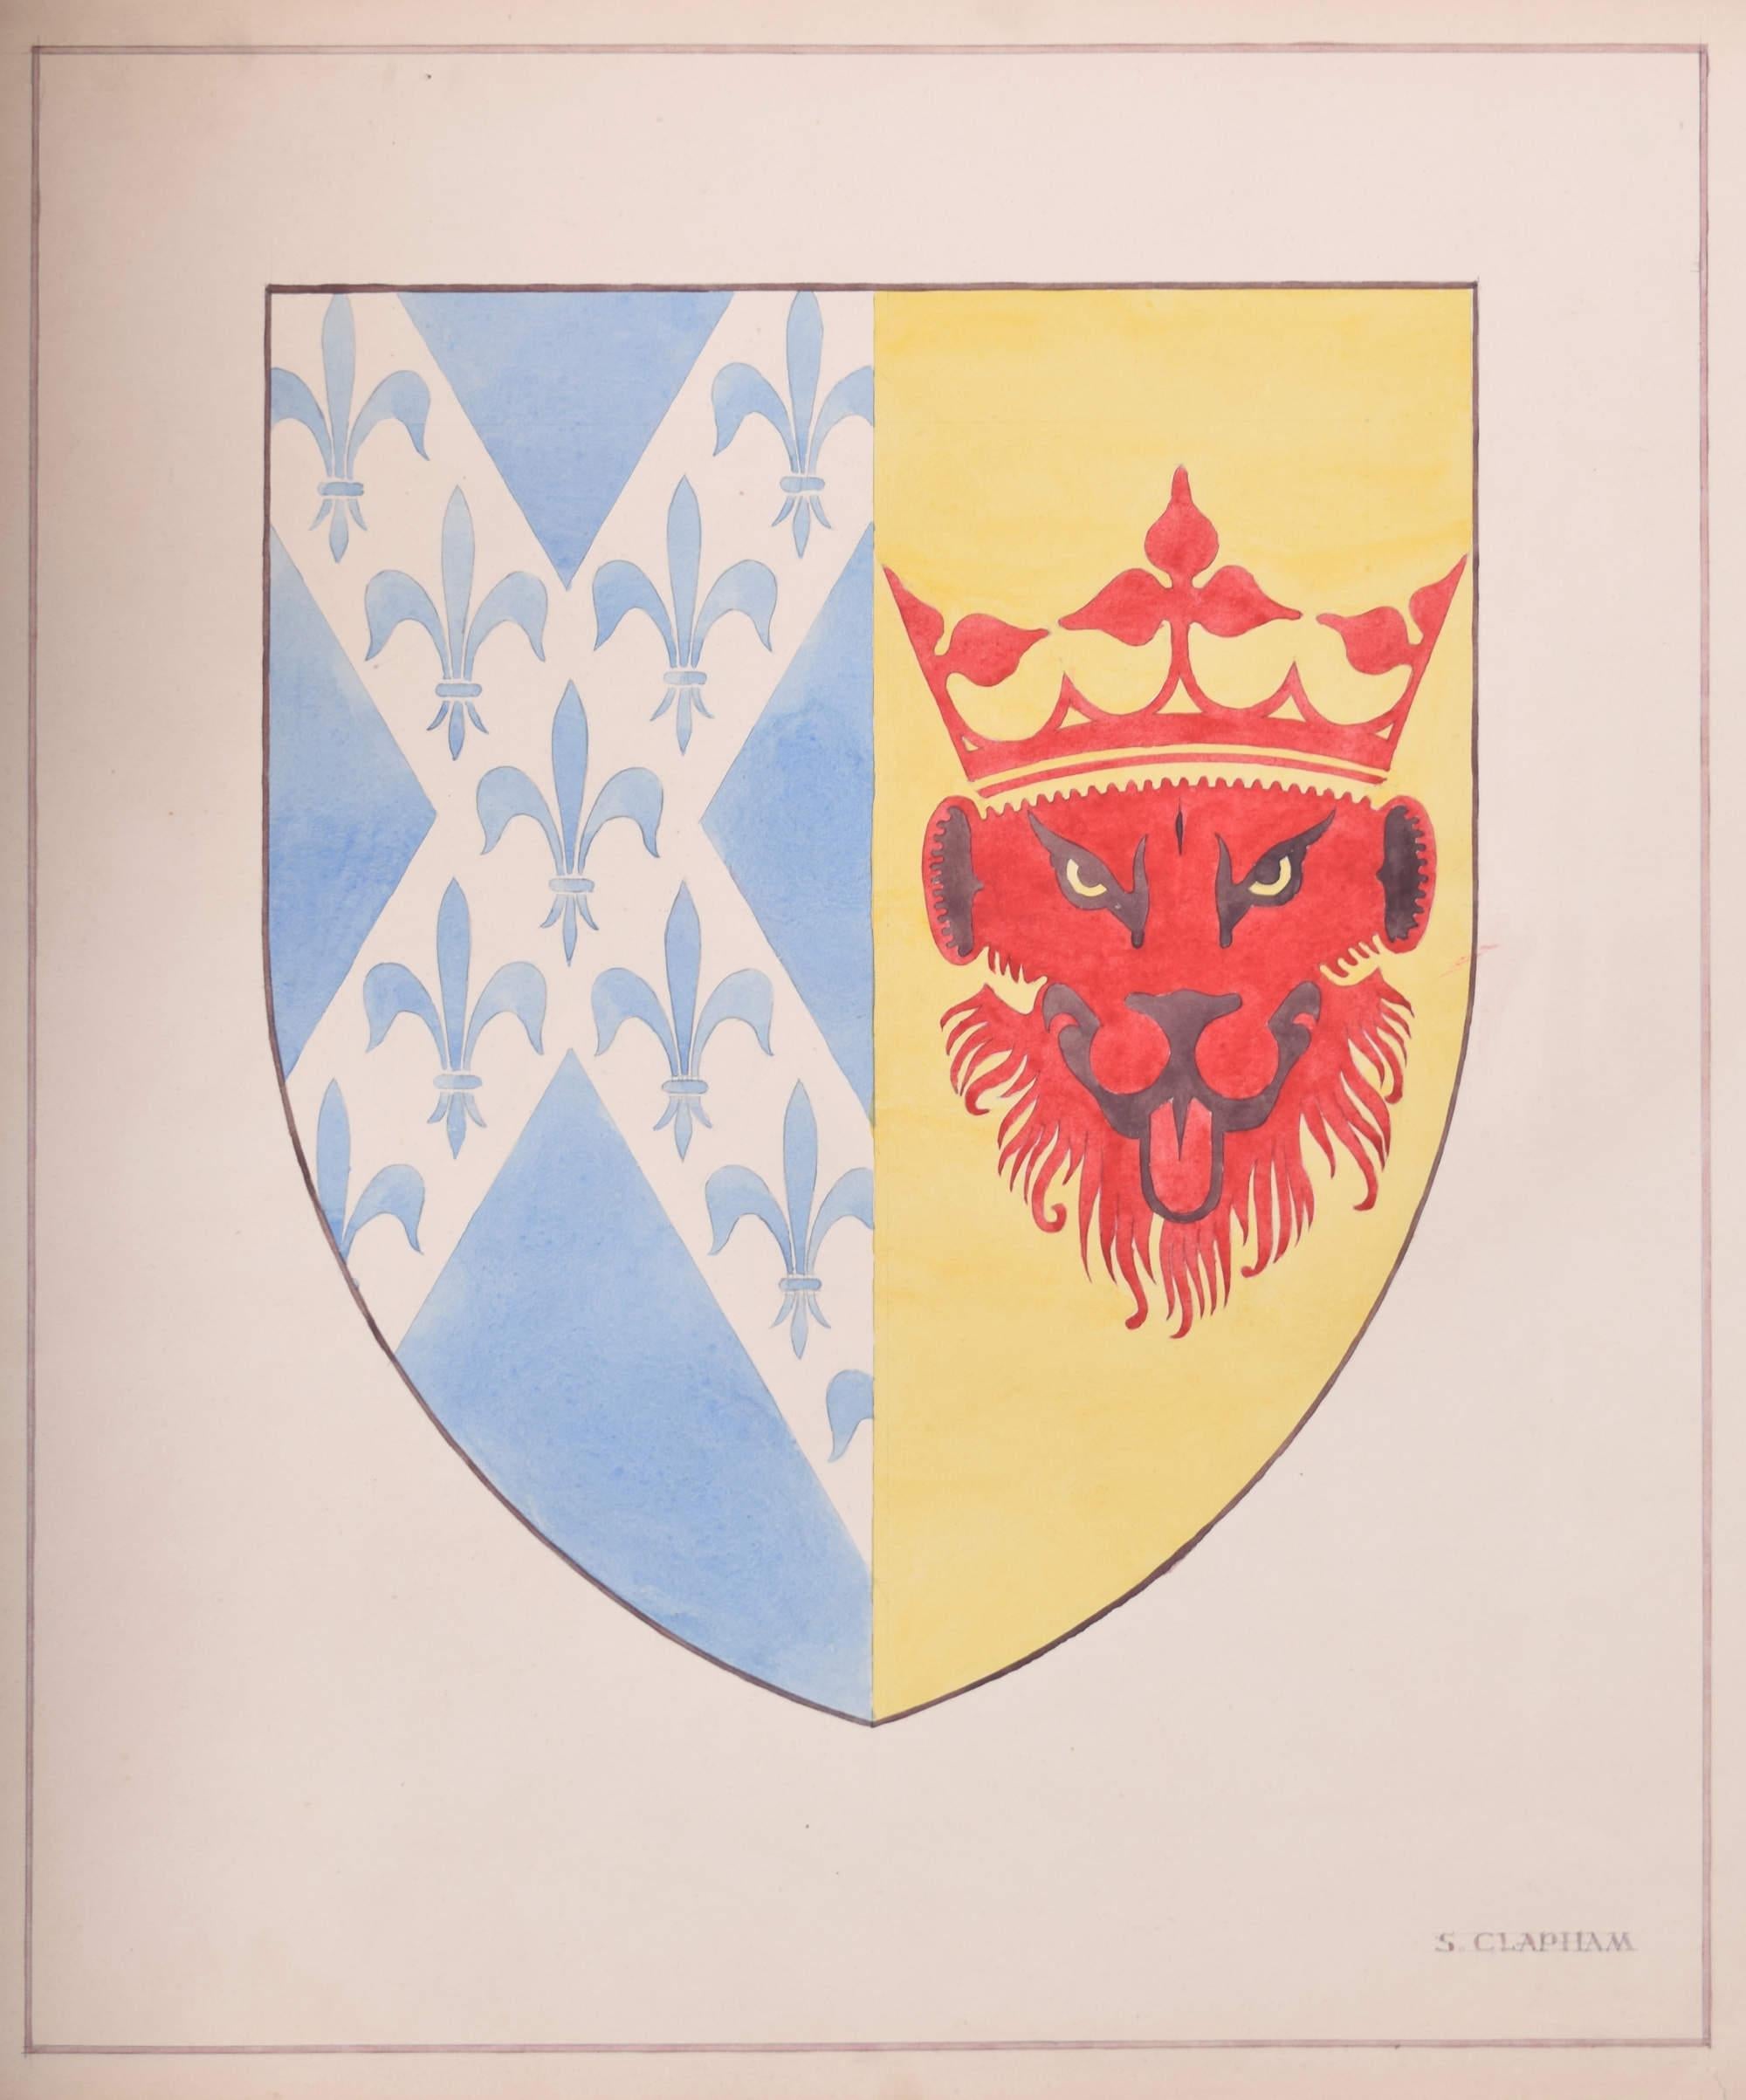 To see more, scroll down to "More from this Seller" and below it click on "See all from this Seller." 

S Clapham (active 1940 - 1960)
Heraldic Design
Watercolour
51 x 43 cm

Signed lower right.

Clapham was an architect based in Stockwell in London.